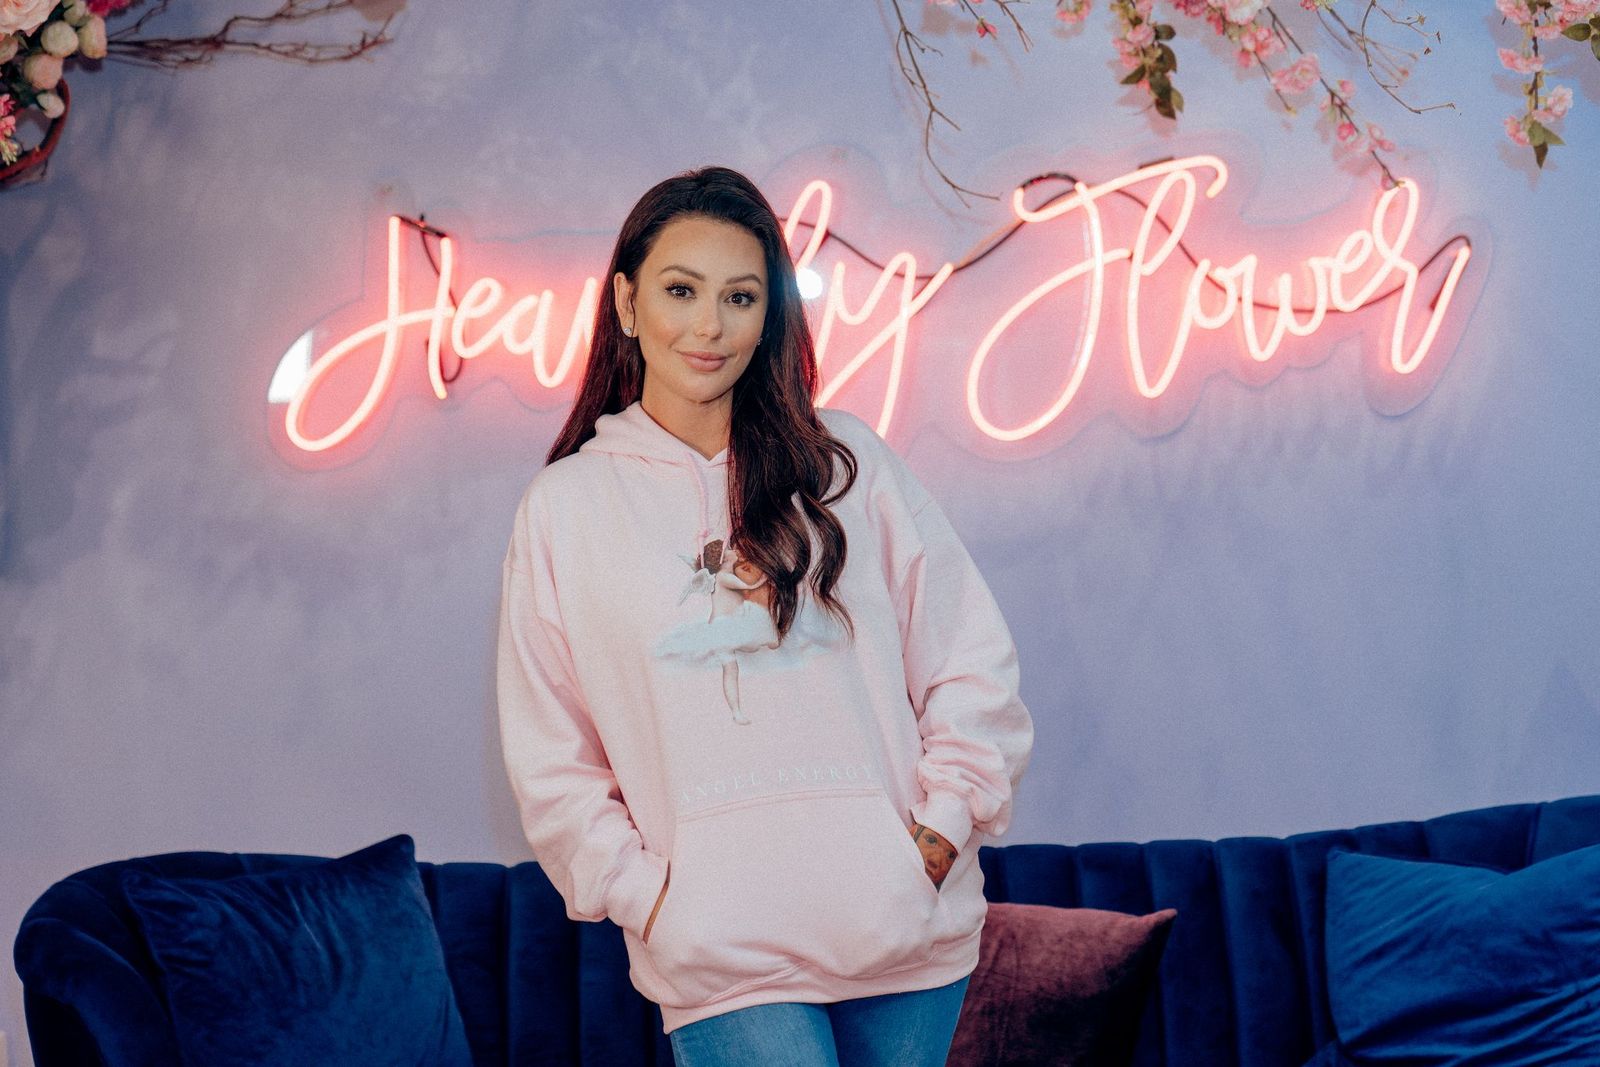 Jenni 'JWoww' Farley poses in front of the 'Heavenly Flower' neon lights in her store in the American Dream Mall